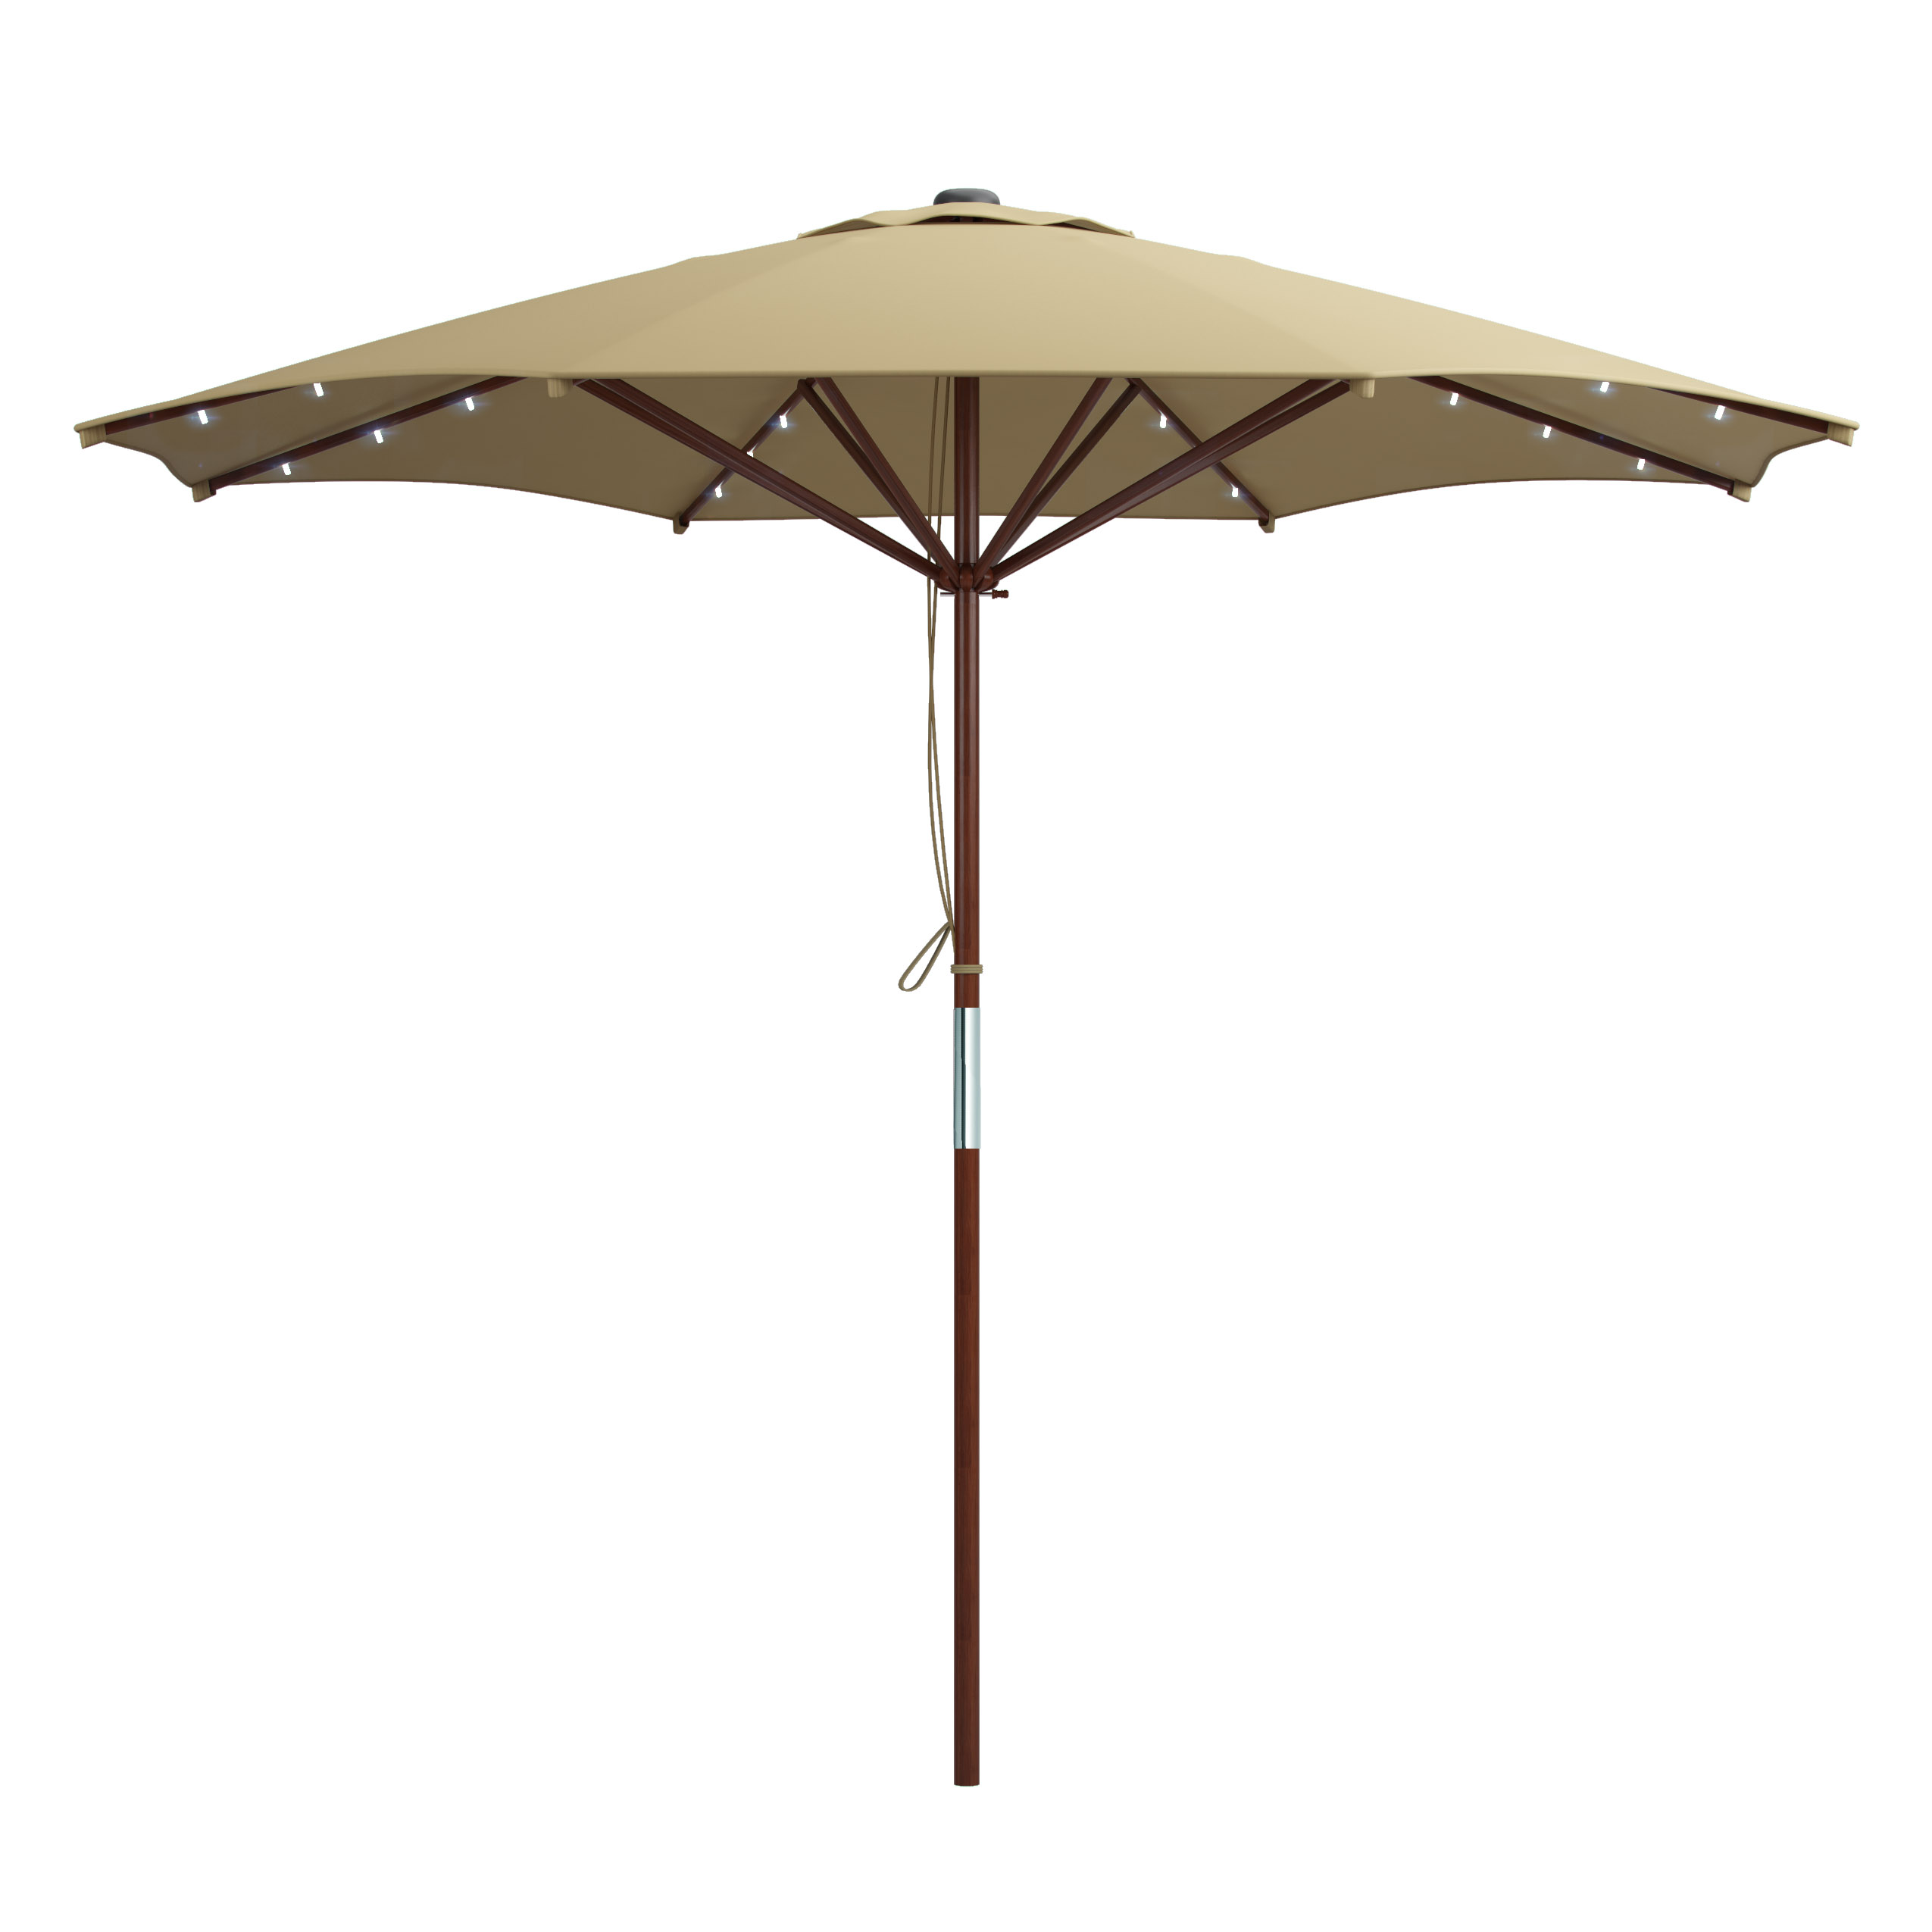 CorLiving 9' Patio Umbrella with Solar Power LED Lights